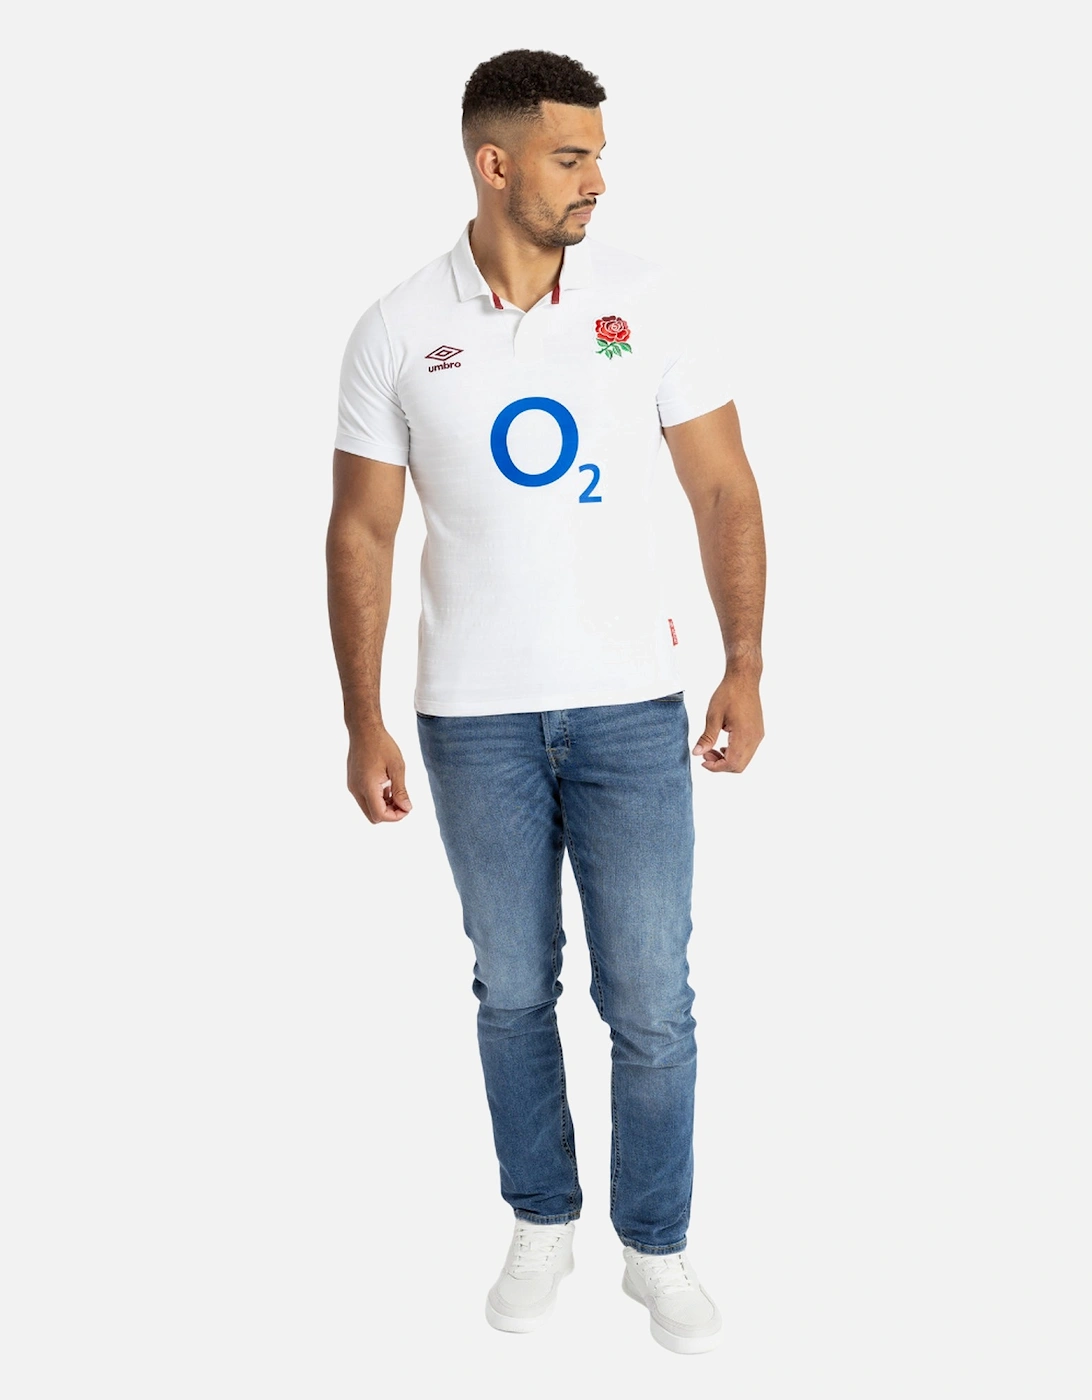 Mens 23/24 England Rugby Home Jersey